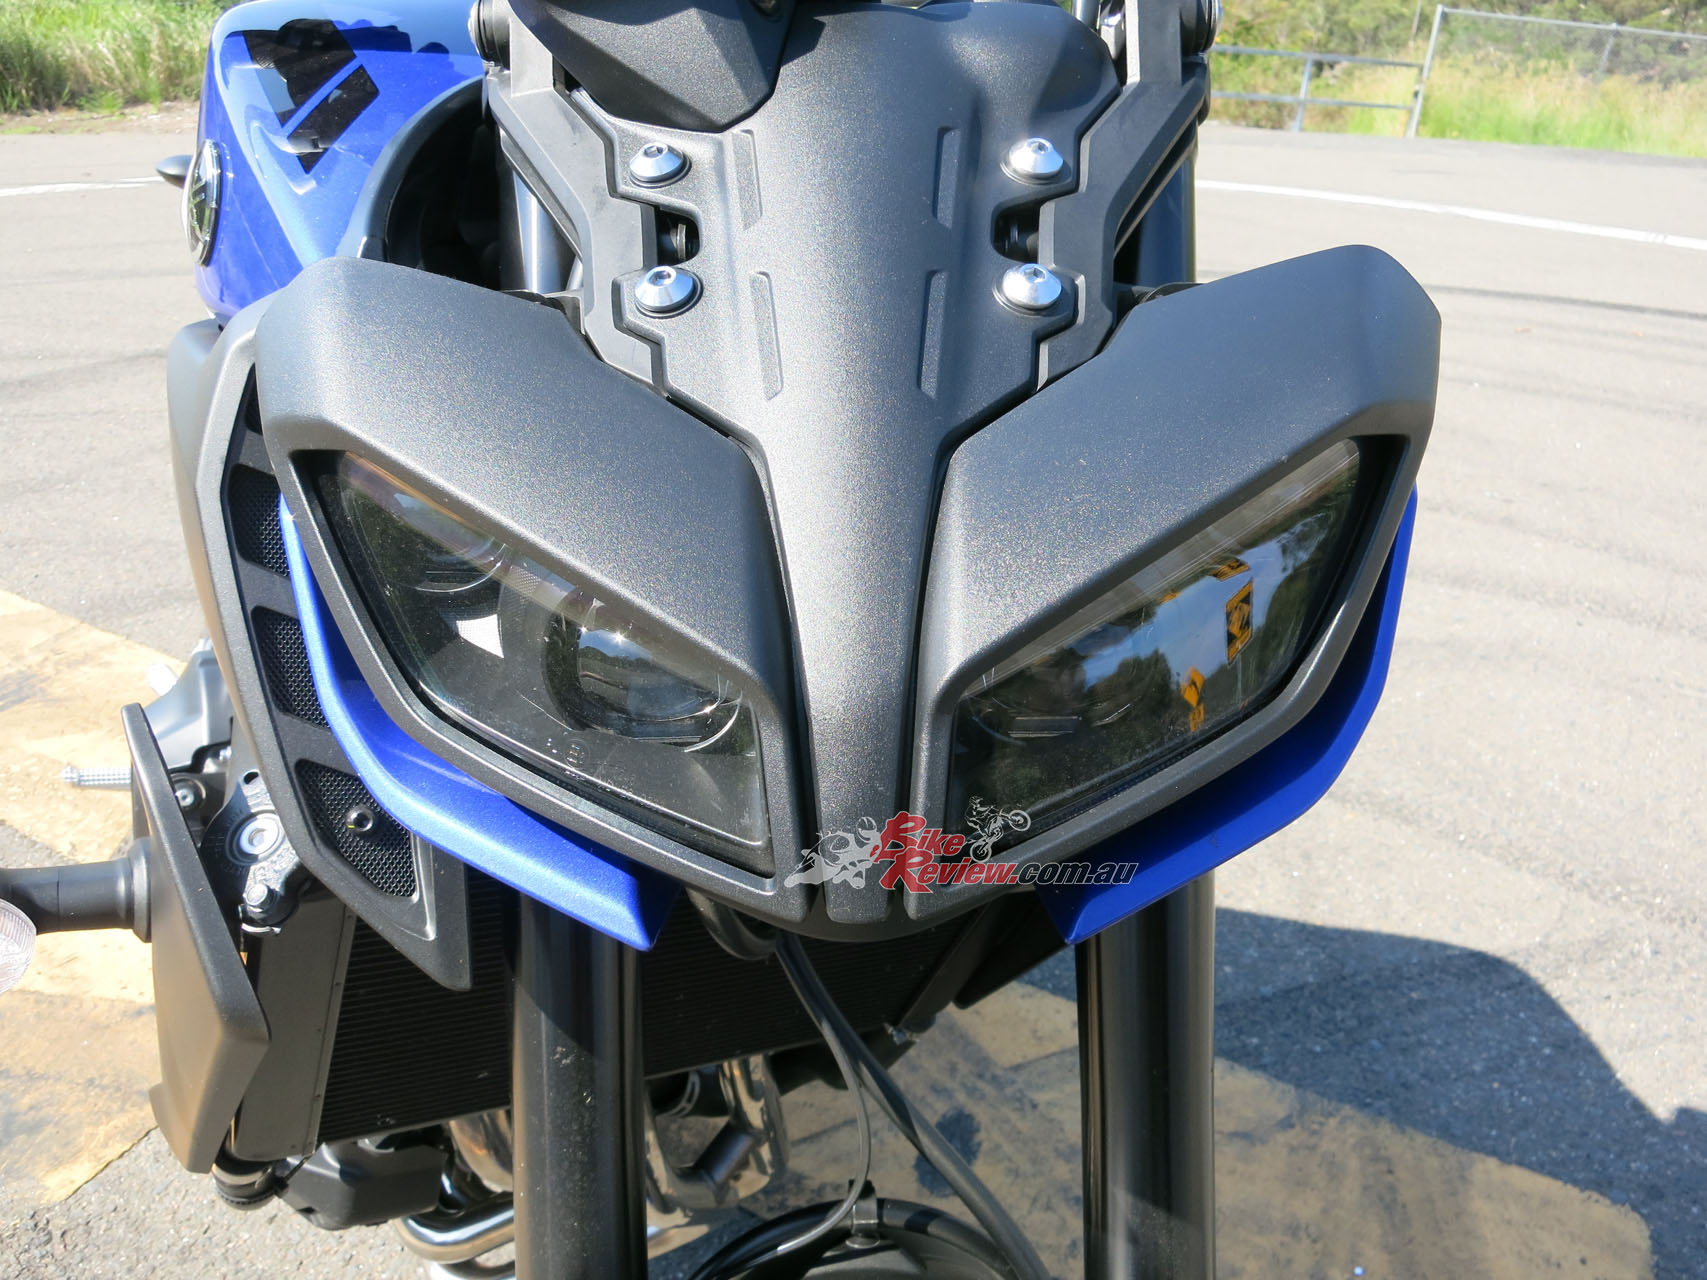 Styling has also seen much improvement on the MT-09